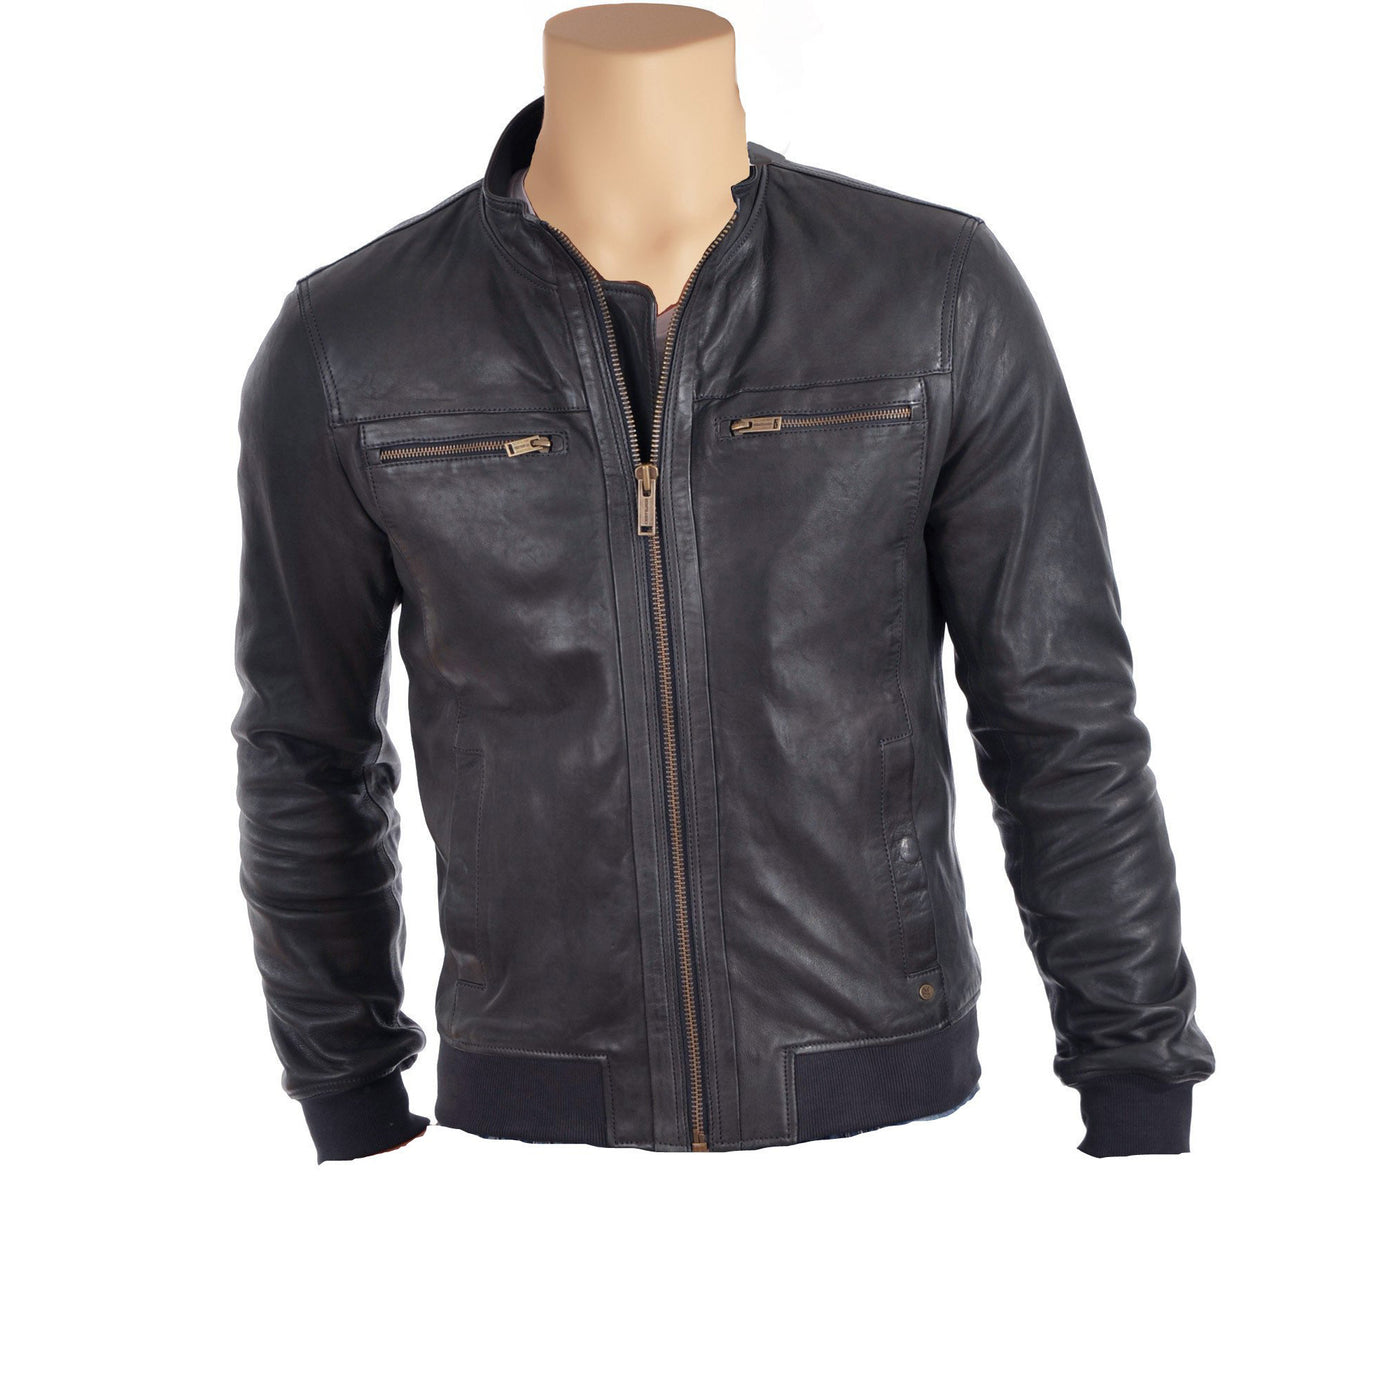 Grey leather jacket with ribbed cuffs and hem - Lusso Leather